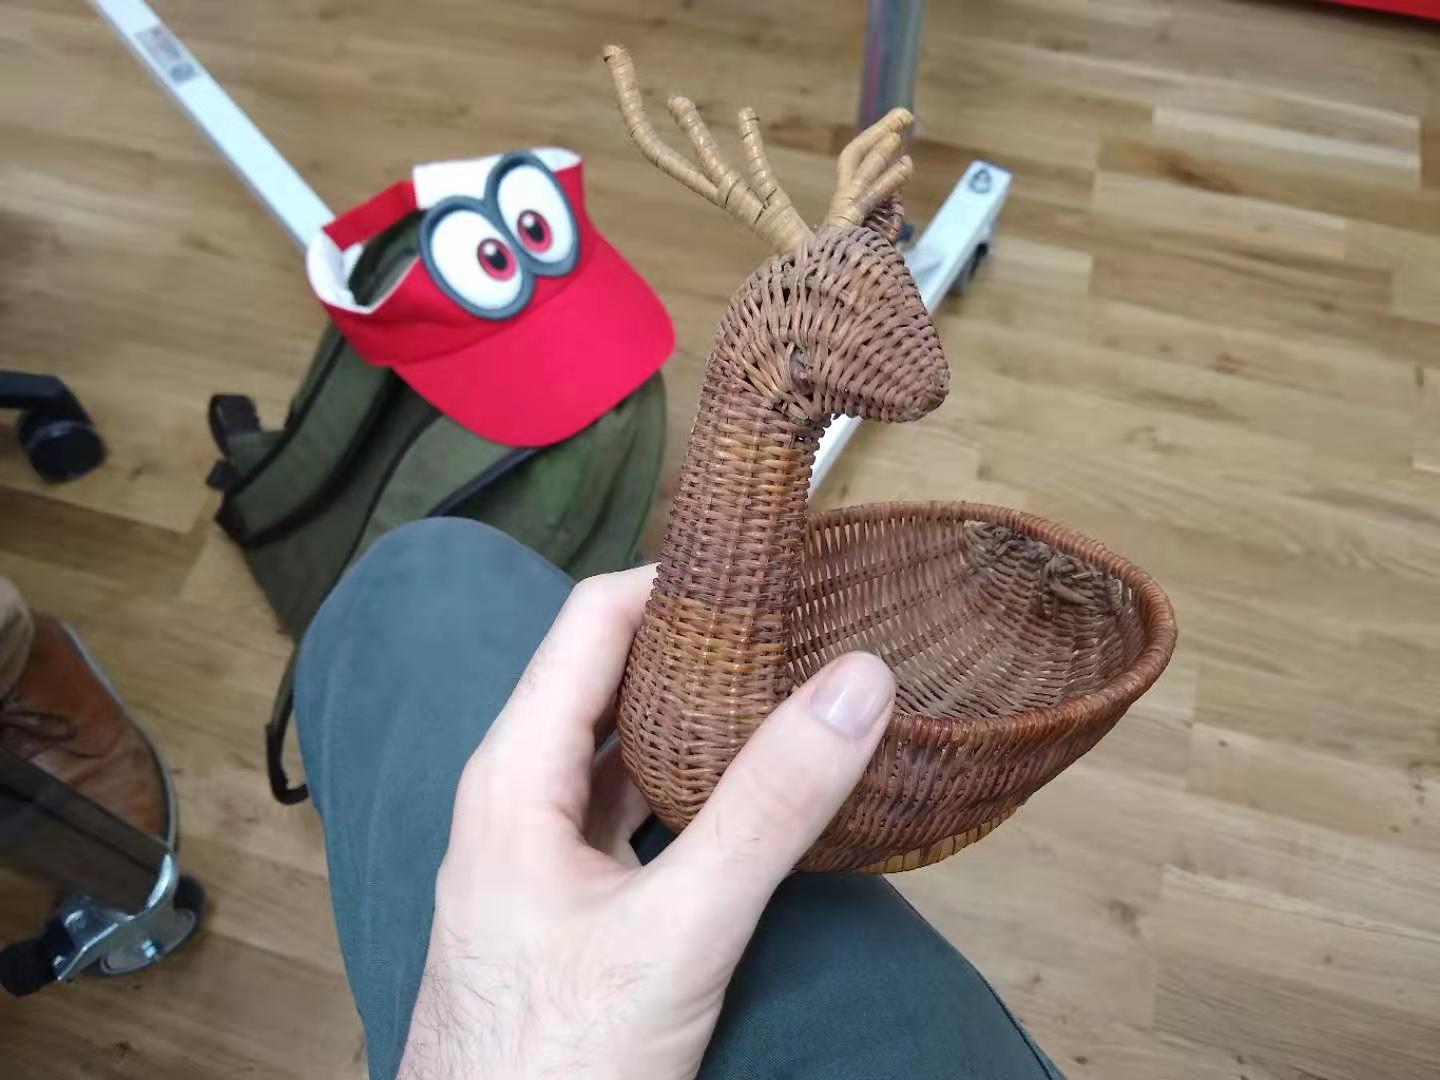 A wicker deer with one eye and ear missing.